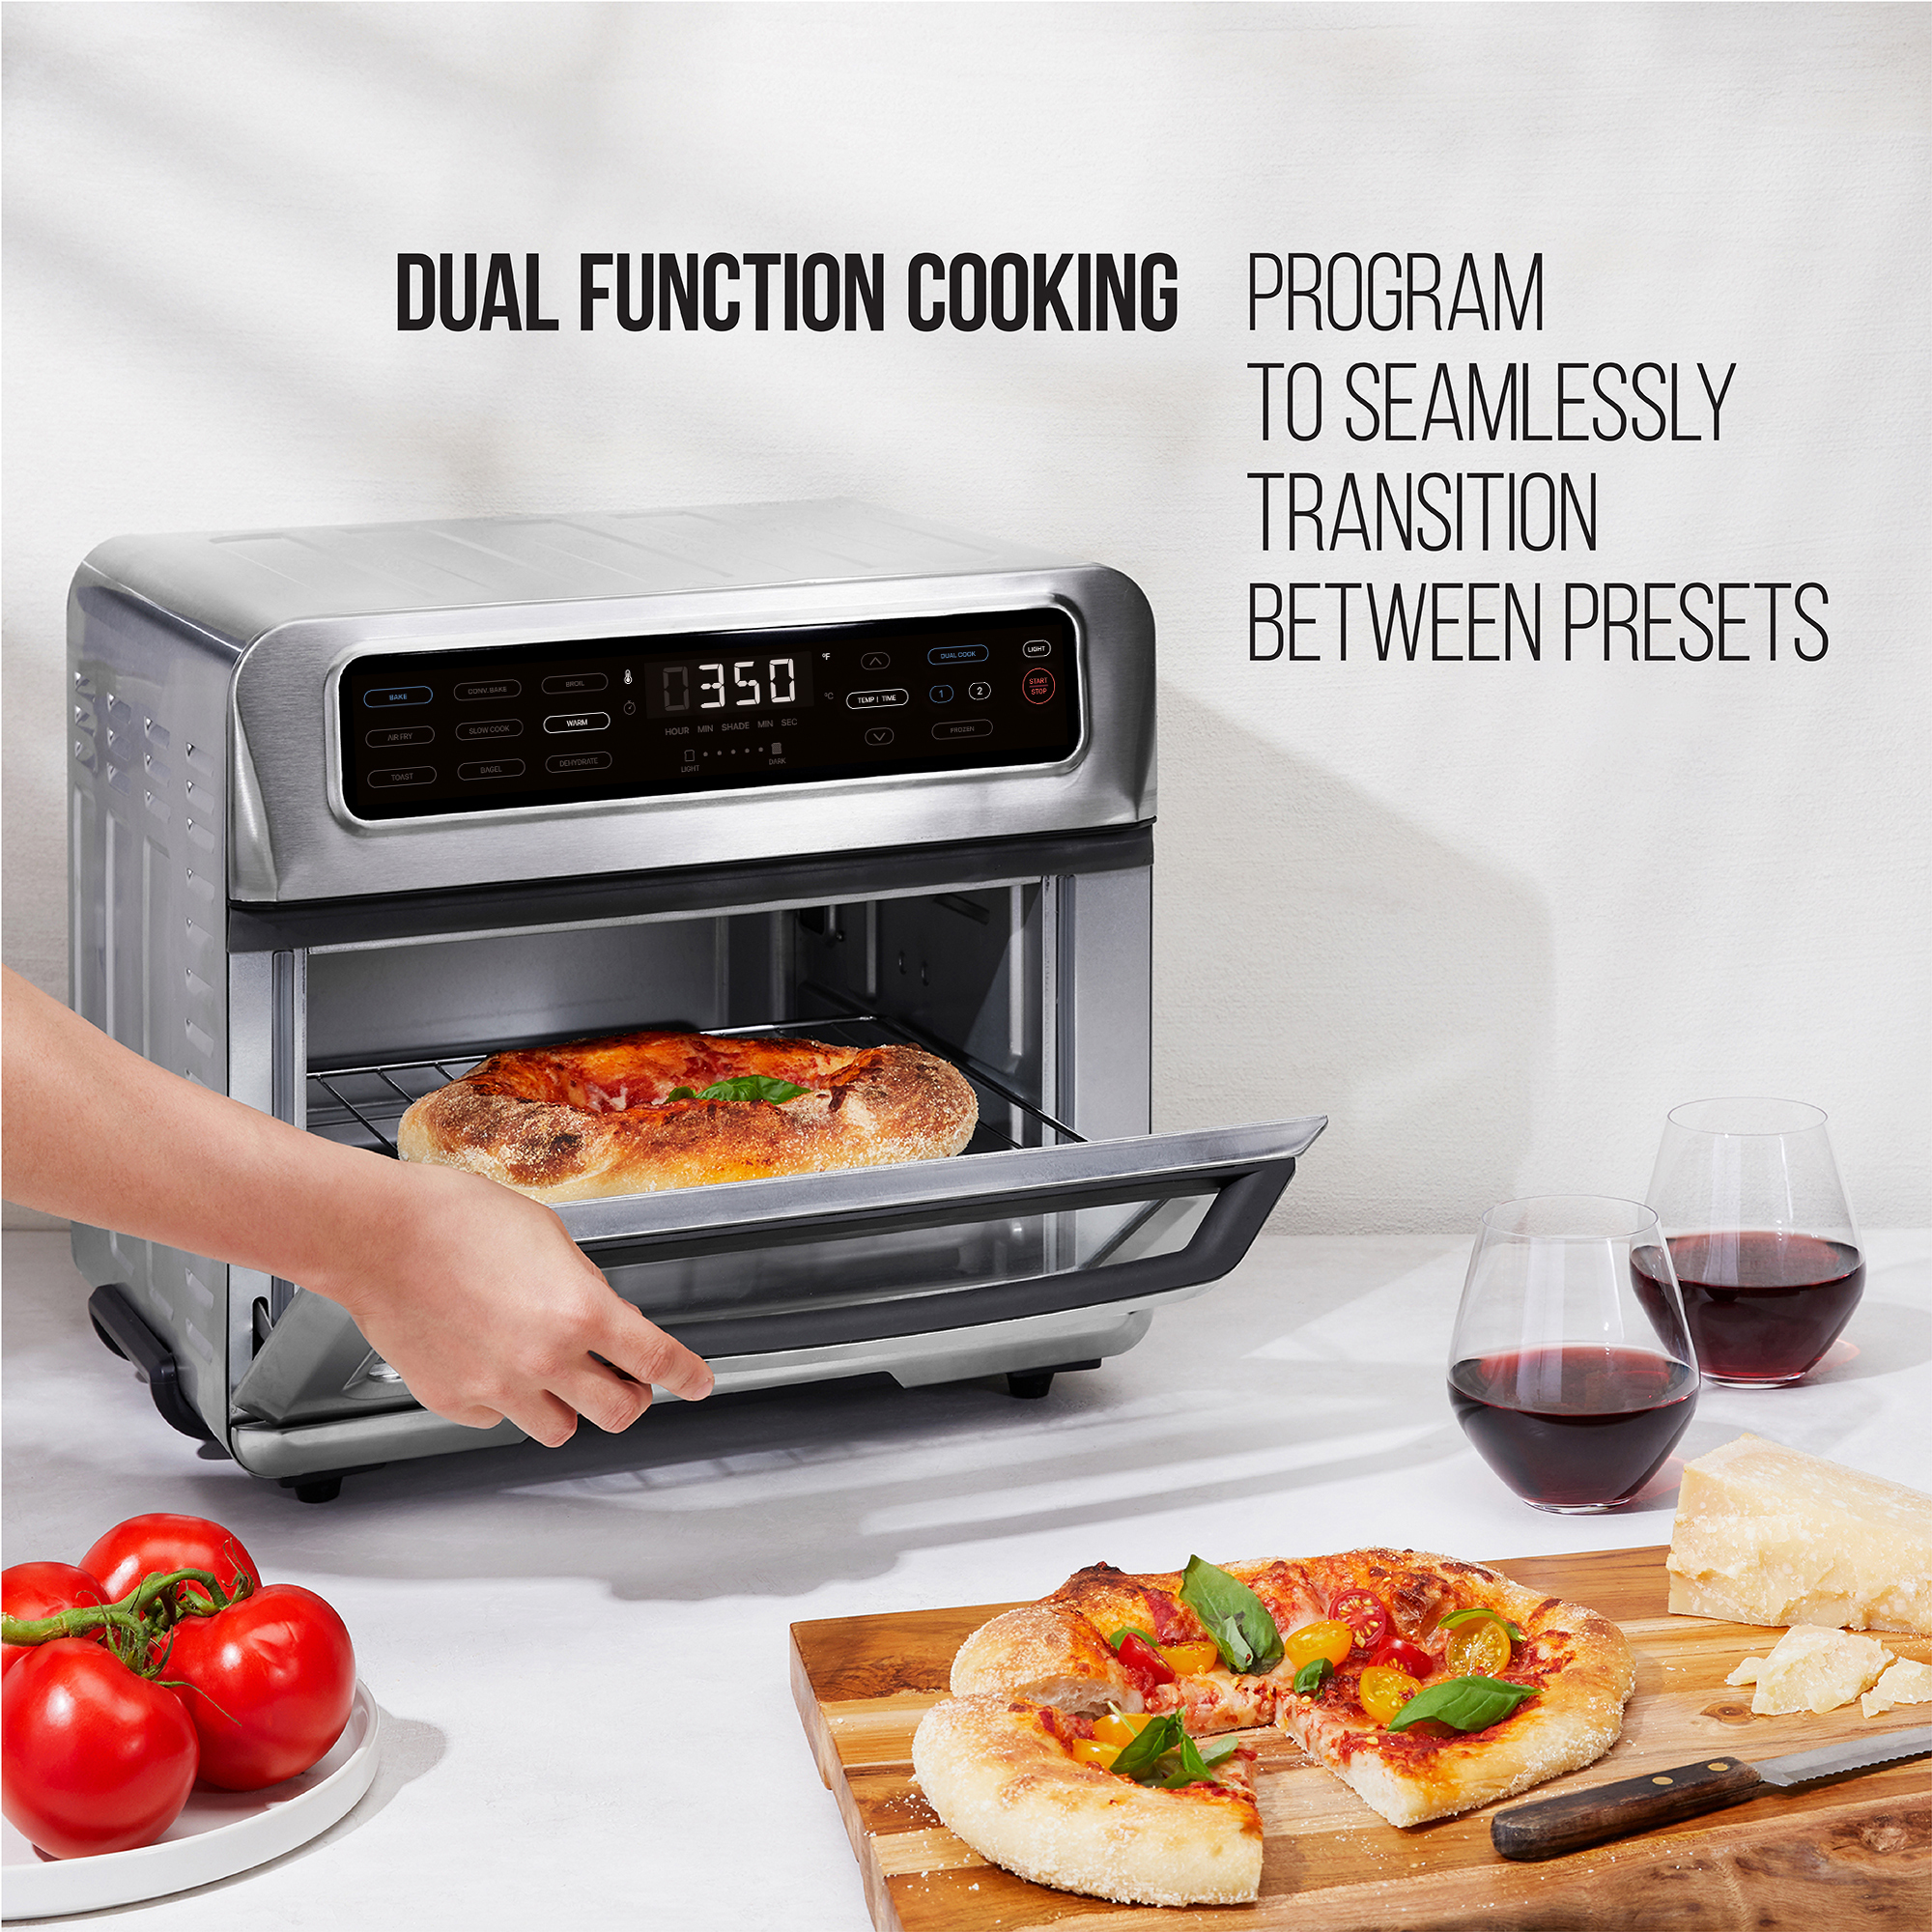 Chefman Toast-Air® Touch Air Fryer + Oven Combo w/ 9 Presets, 21 Qt Capacity - Stainless Steel, New - image 7 of 8